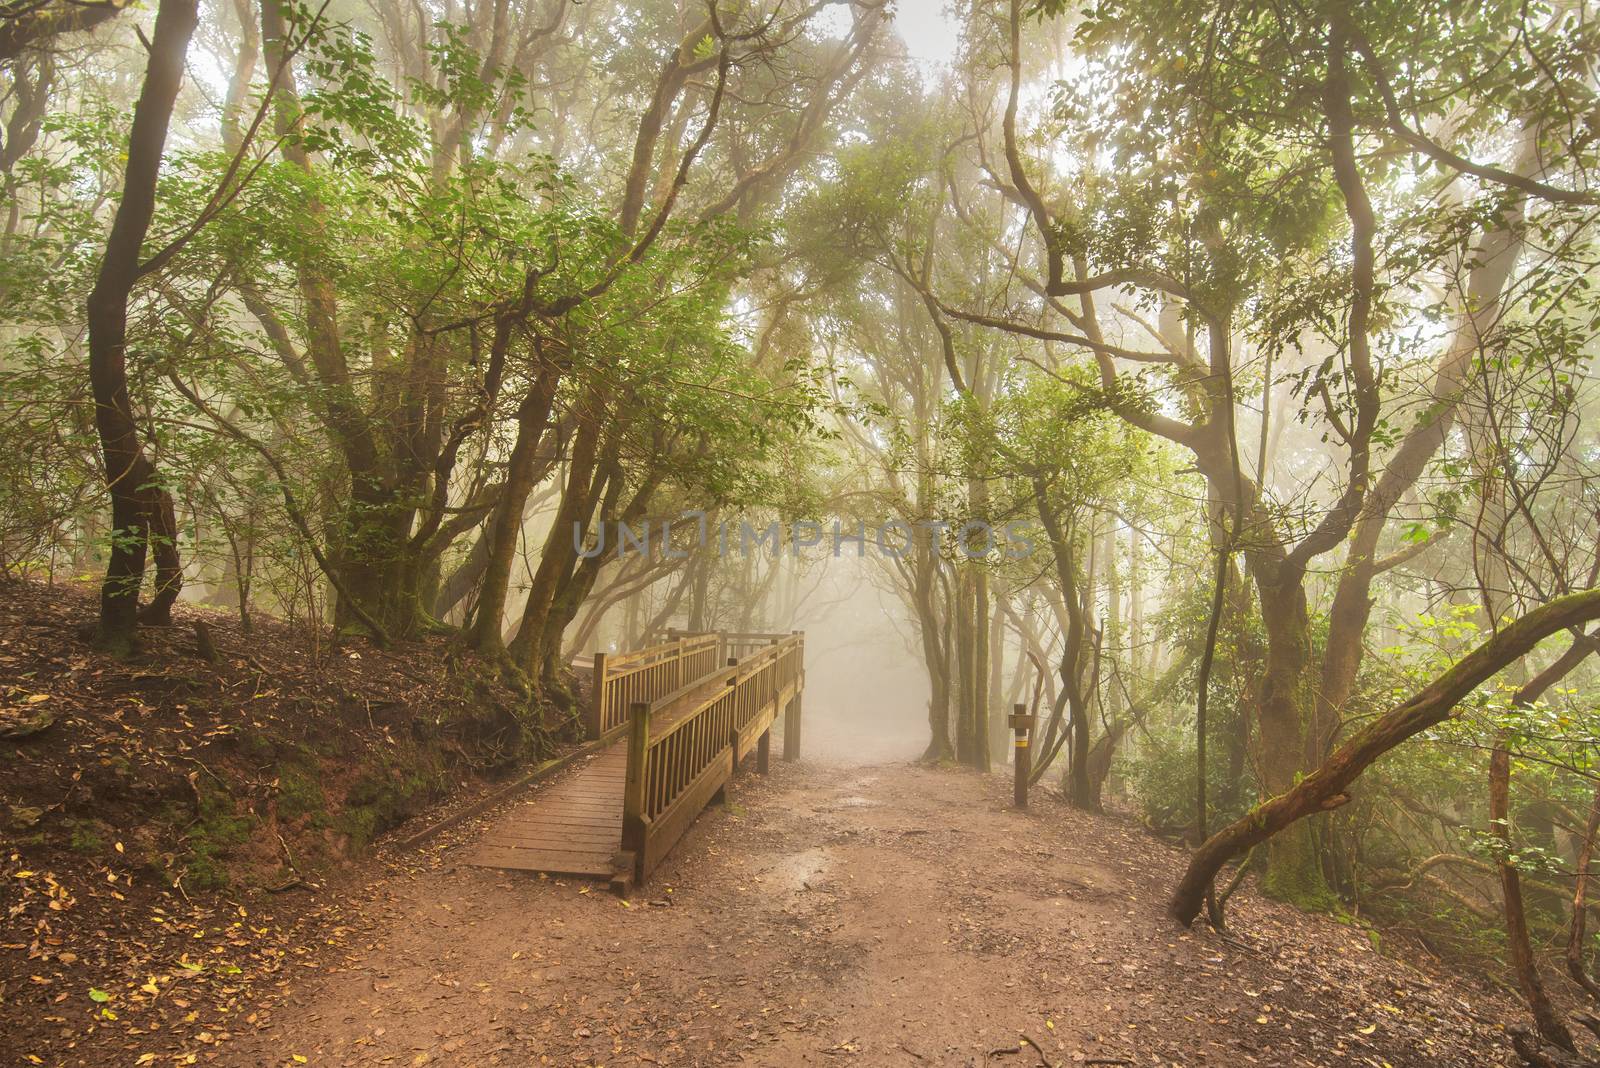 Misty forest in Anaga mountains, Tenerife, Canary island, Spain. by HERRAEZ